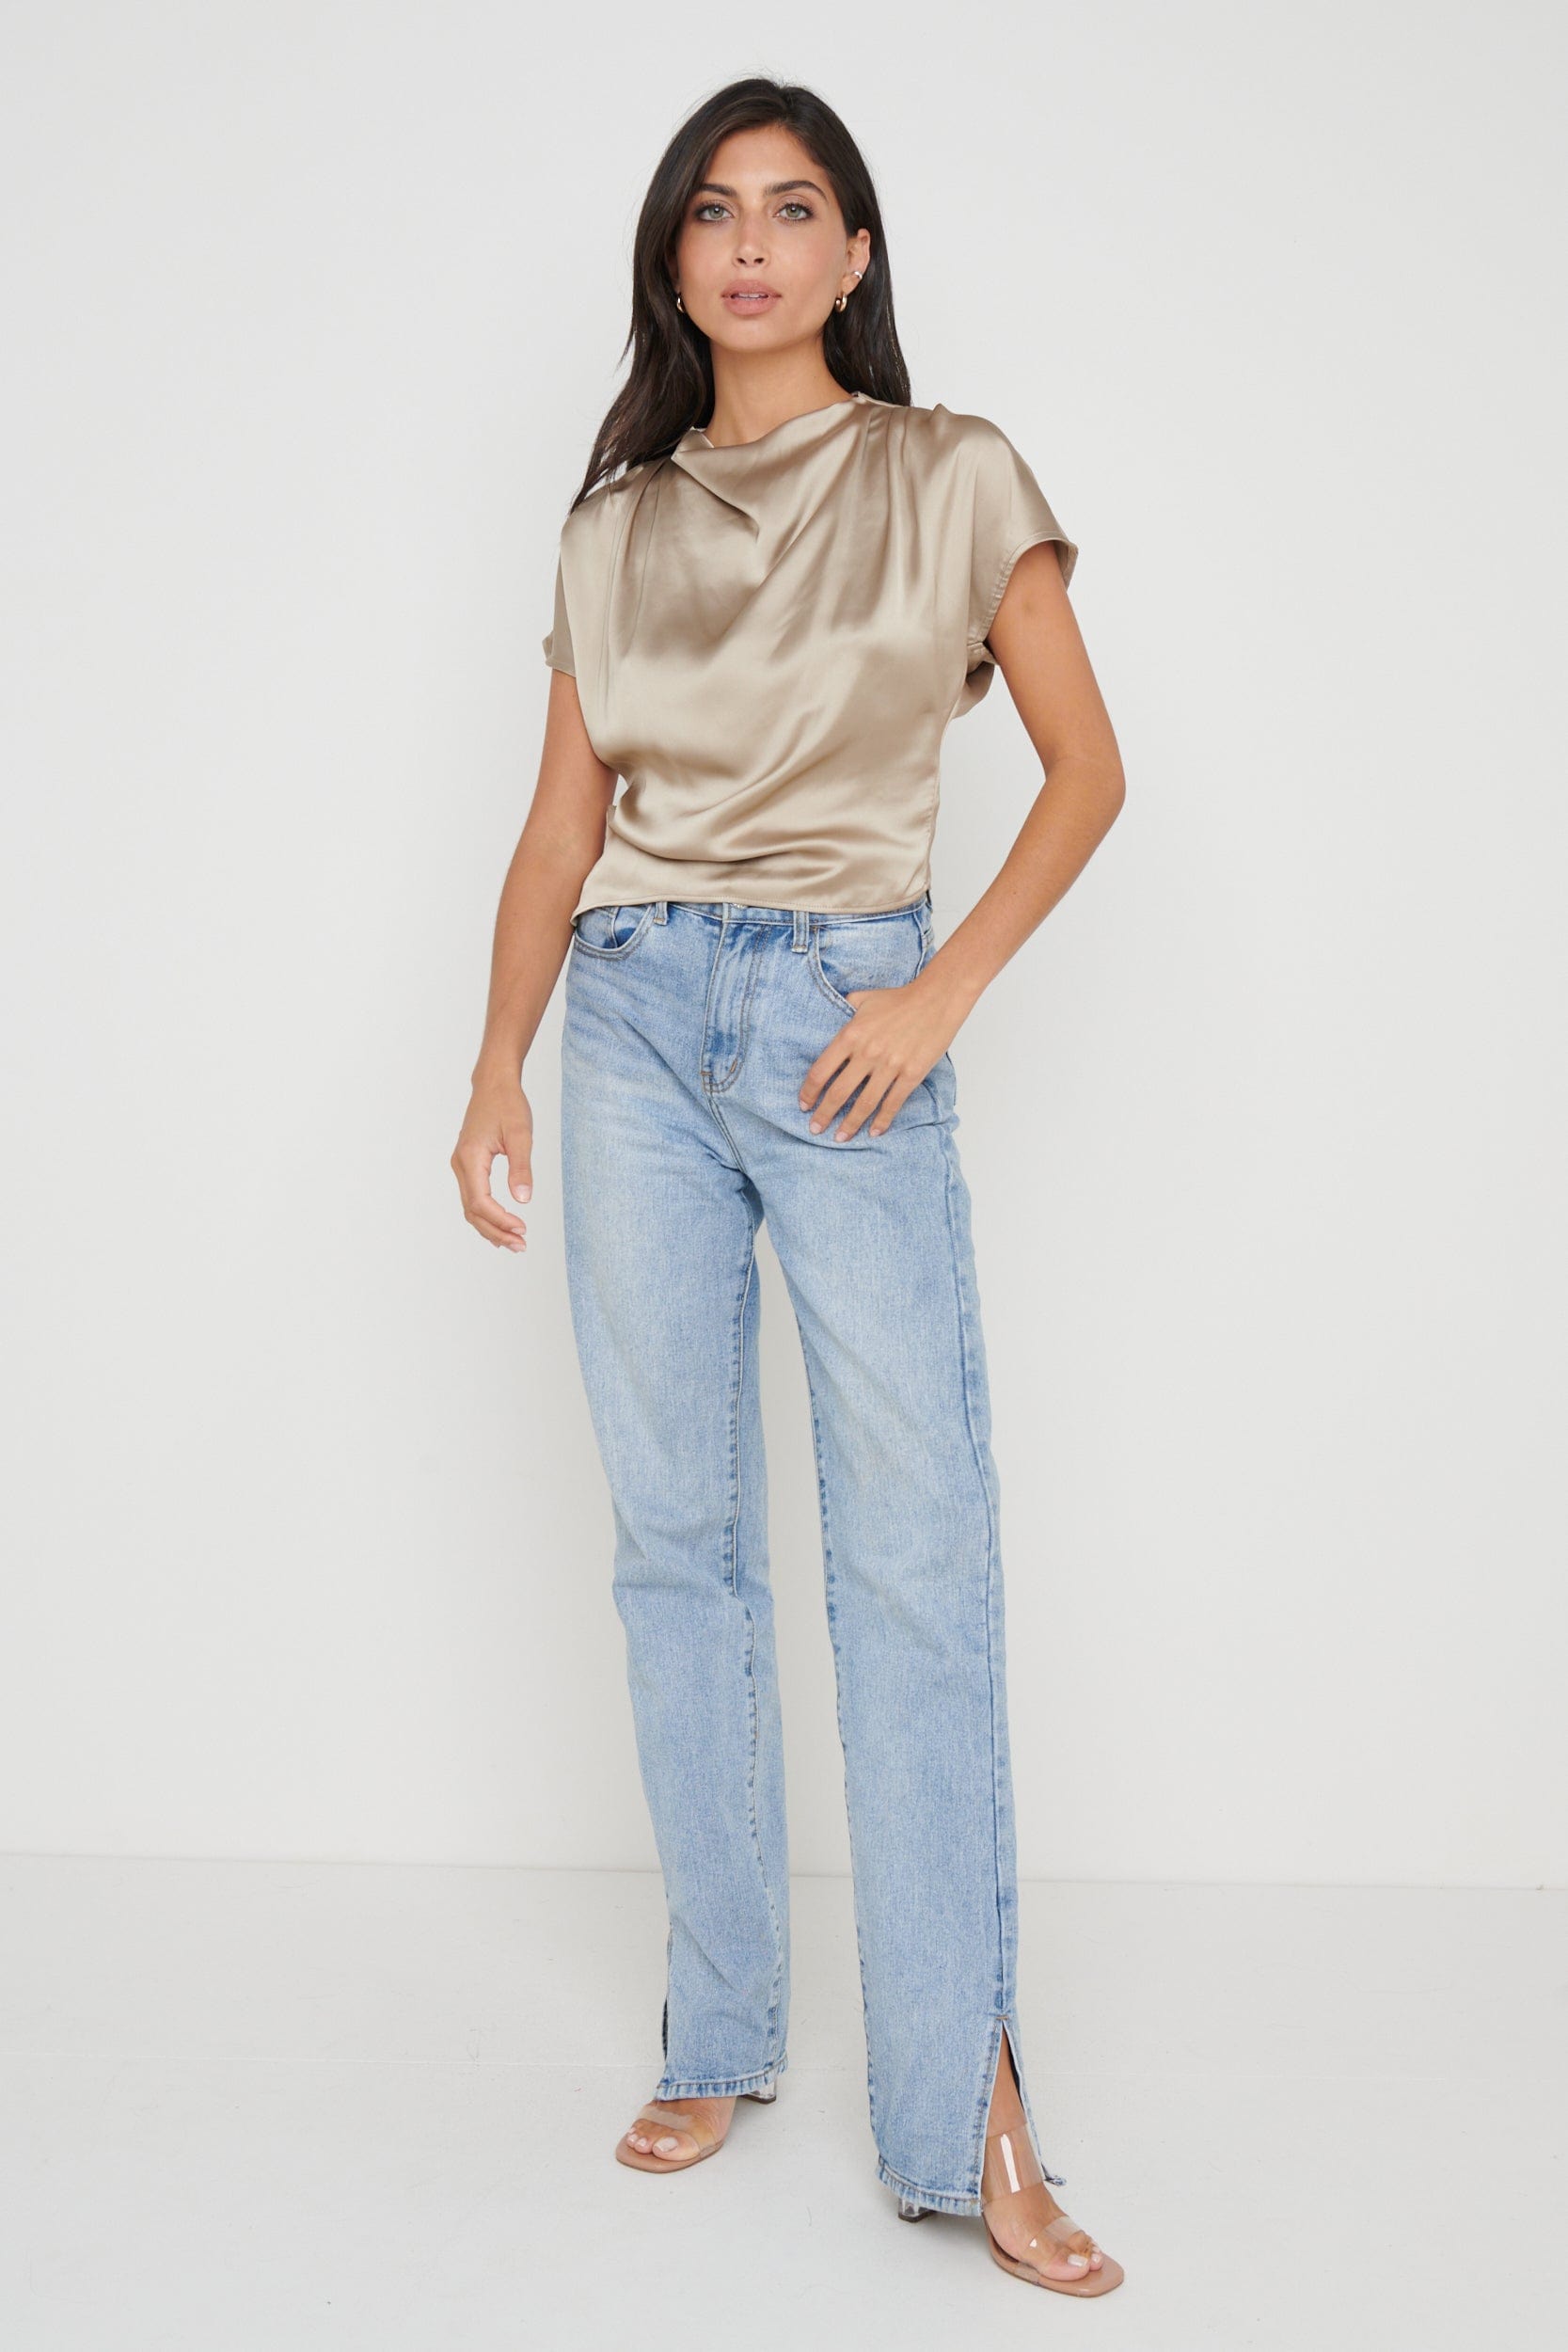 Lilith Cropped Blouse - Taupe